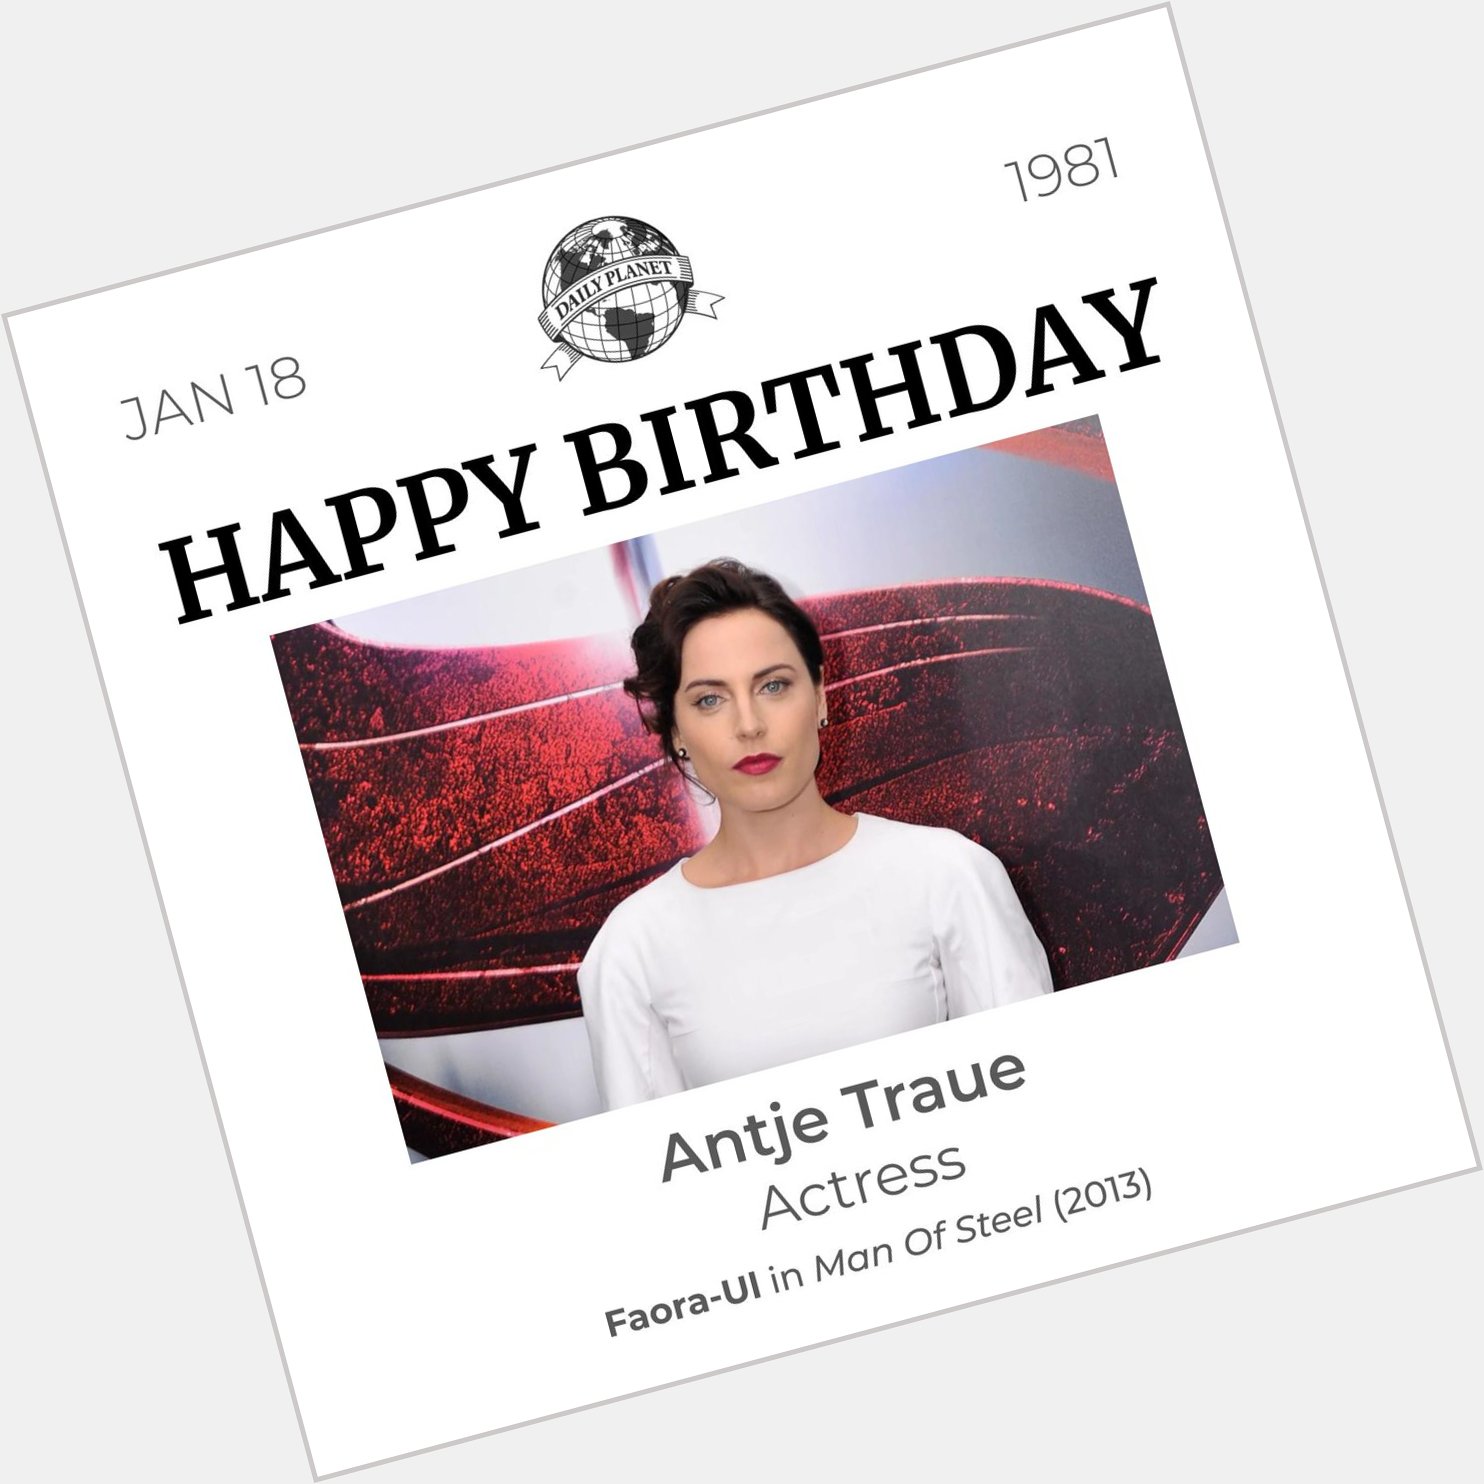 Happy birthday to Antje Traue, Faora in the 2013 s Man of Steel! 